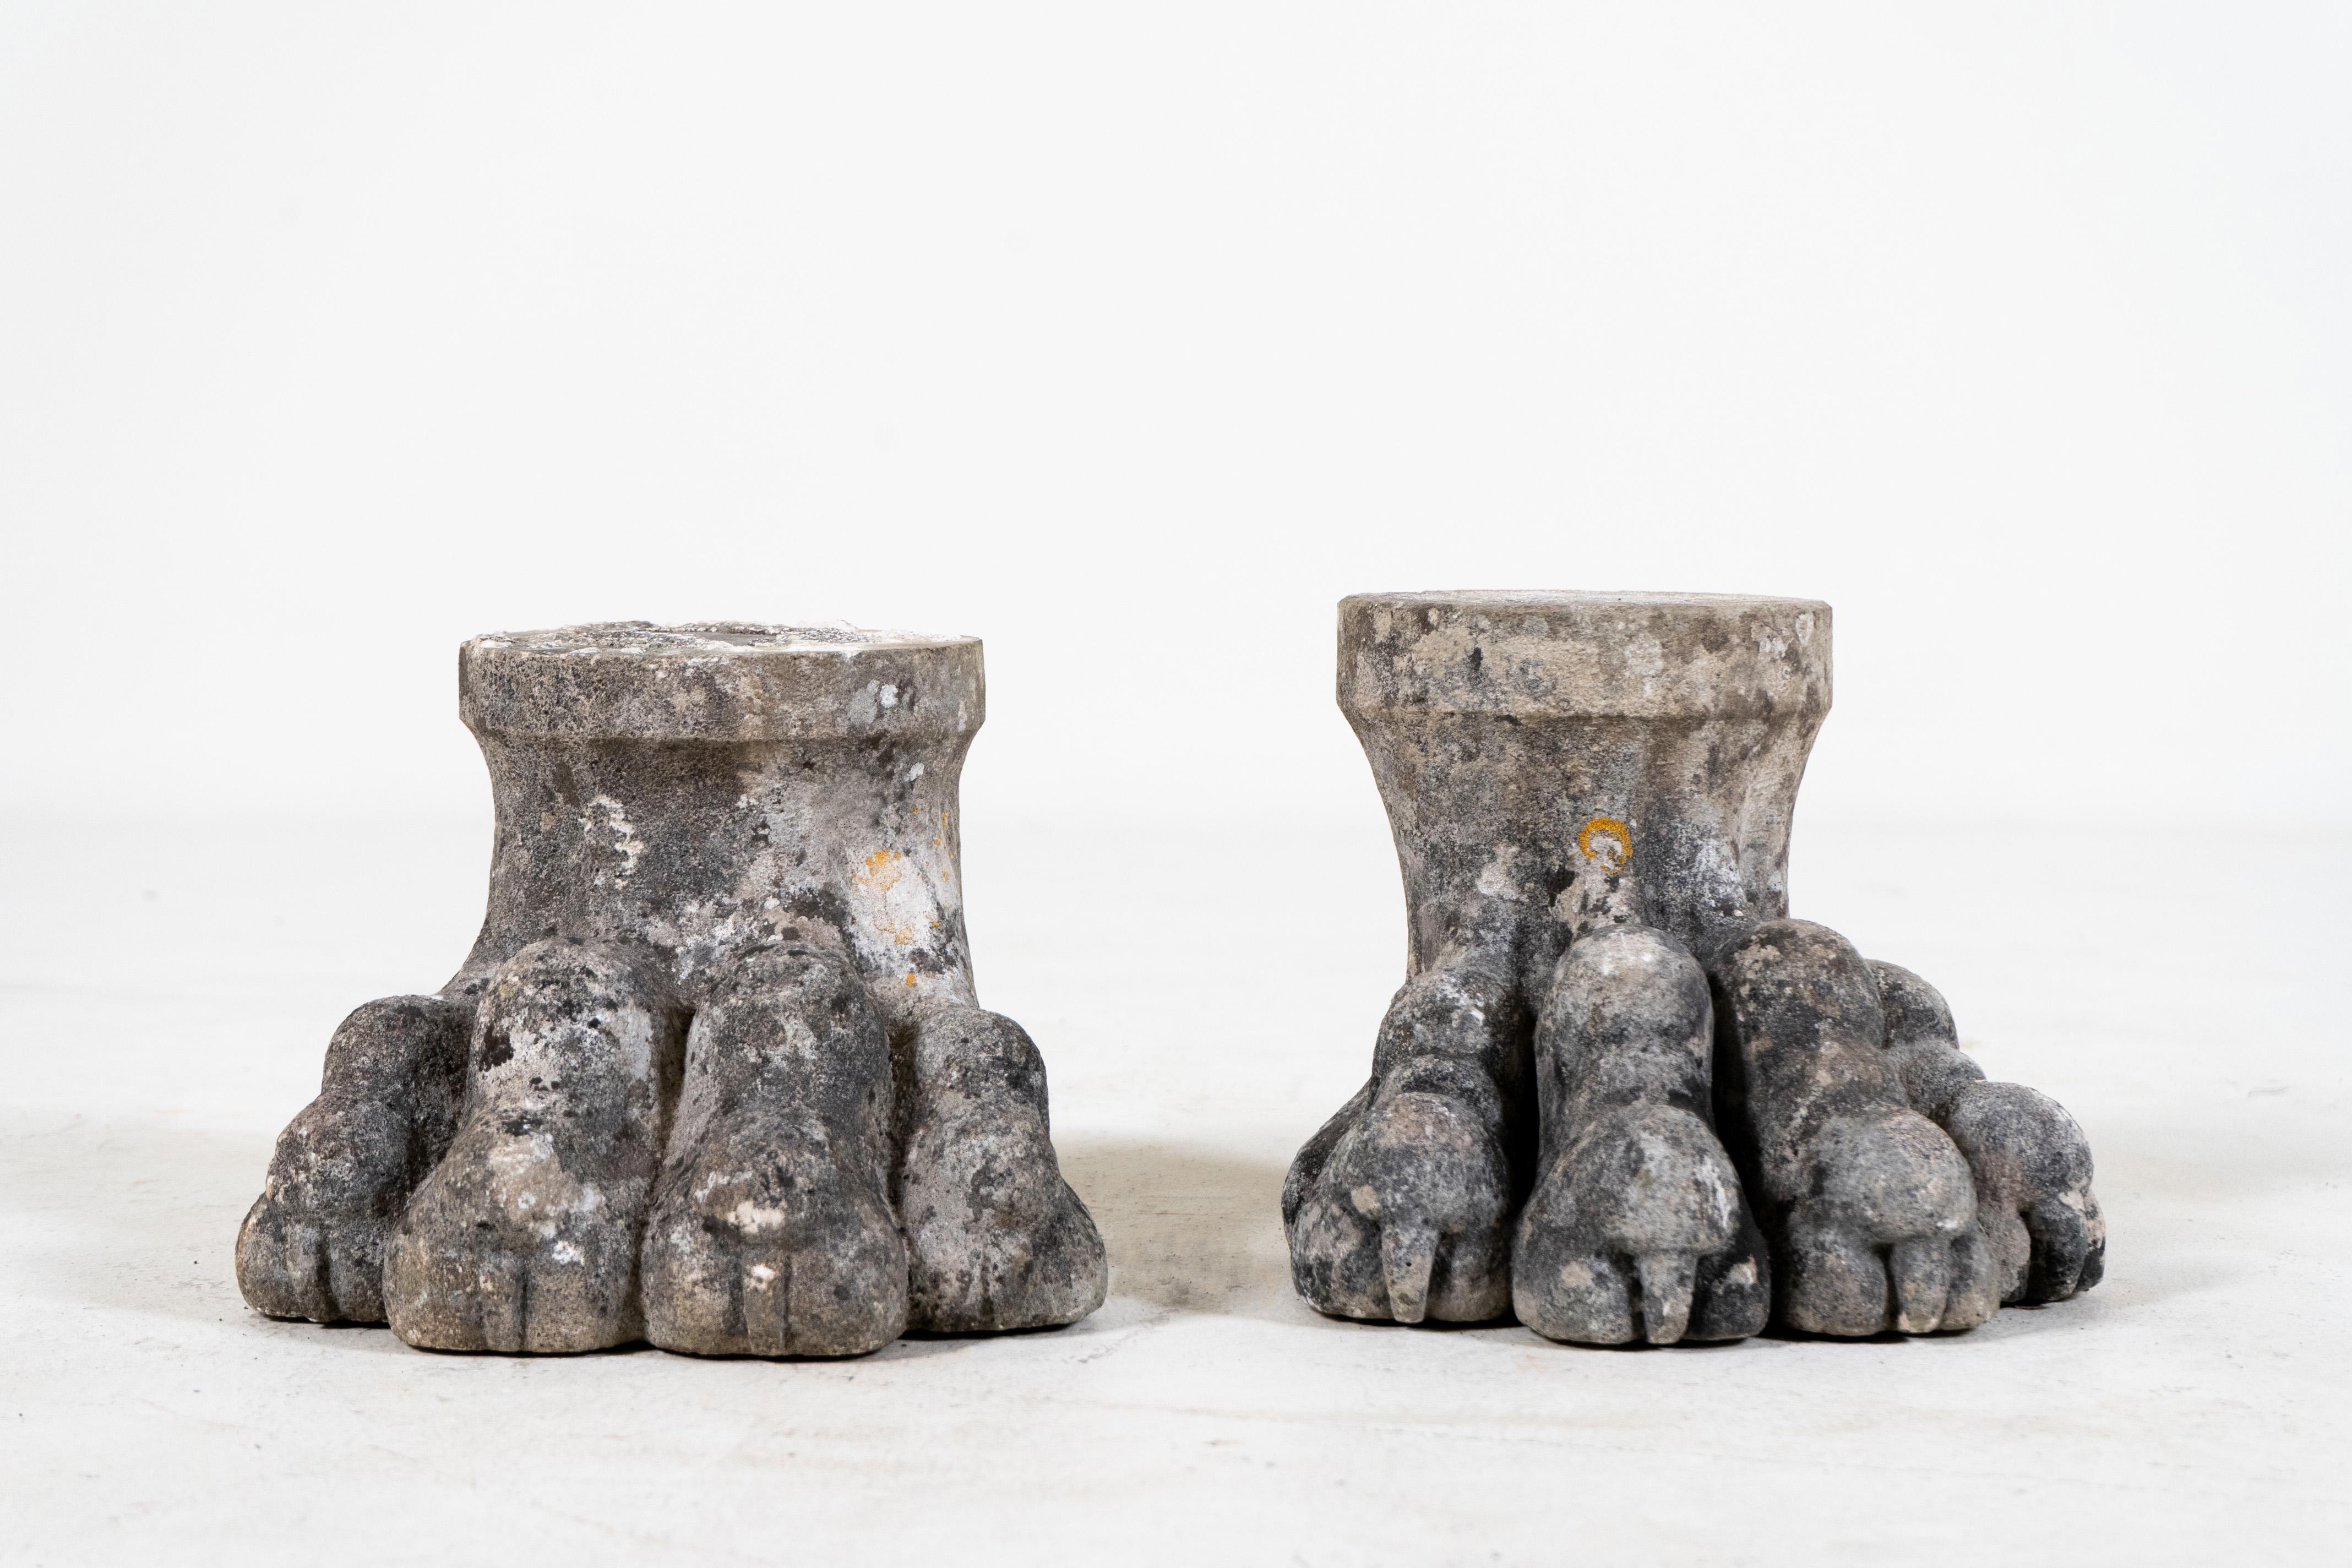 A very large pair of cement lion paws. It's unclear whether these impressive paws were made as playful garden stands or were part of a larger sculpture. They are in excellent condition with a pleasing grey patina enlivened by blotches of yellow